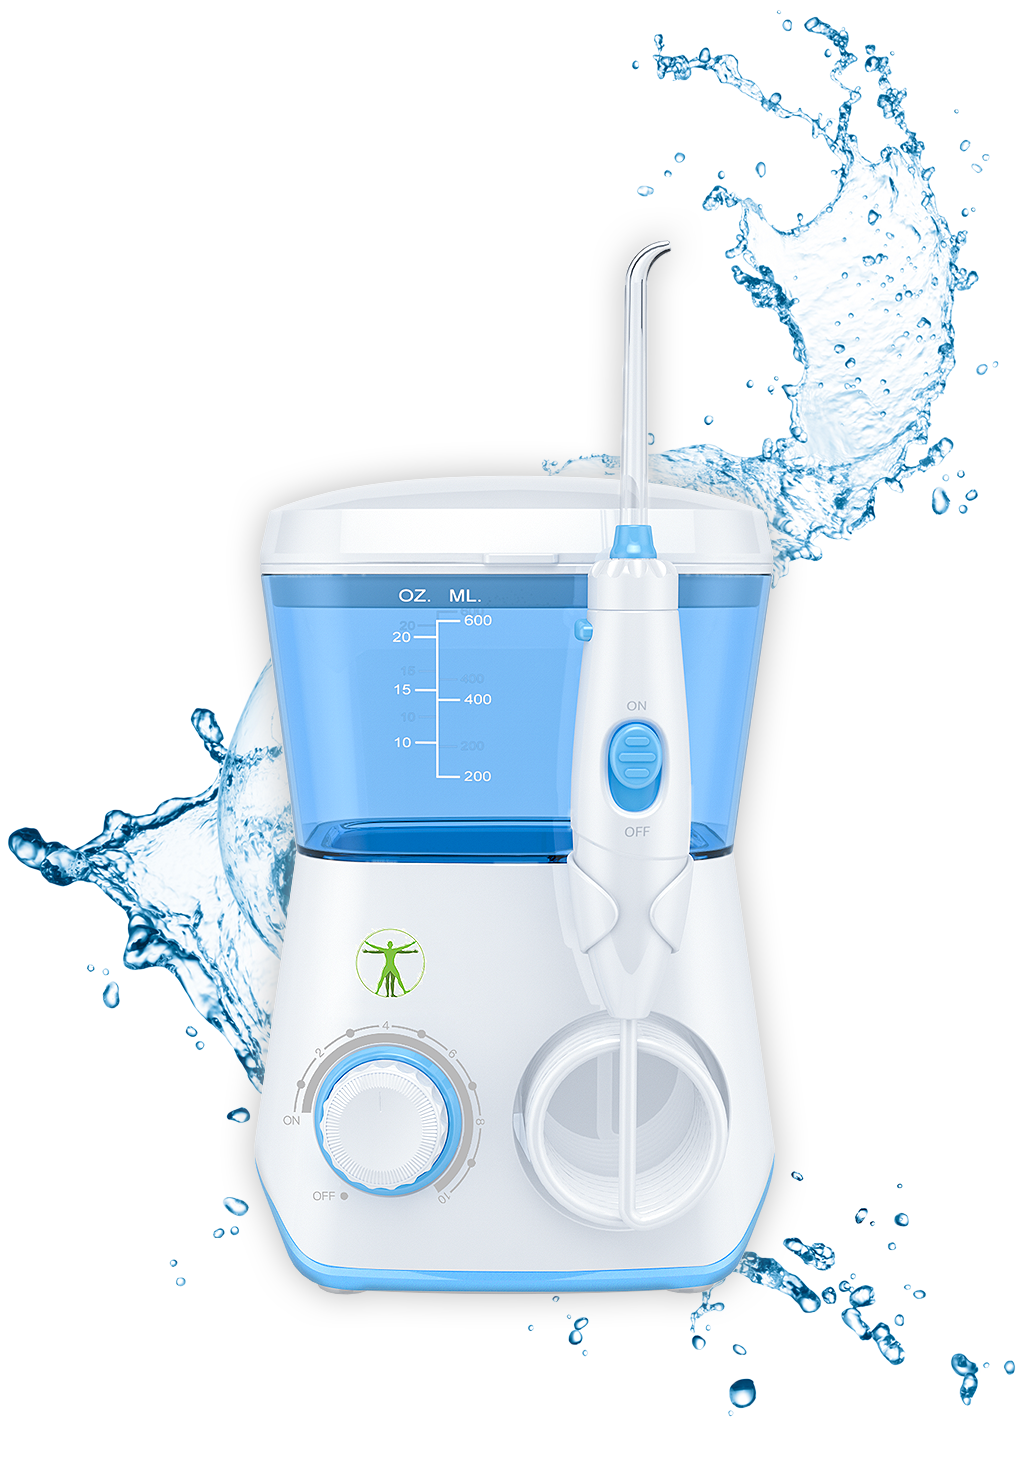 Perfect Smile Water Flosser